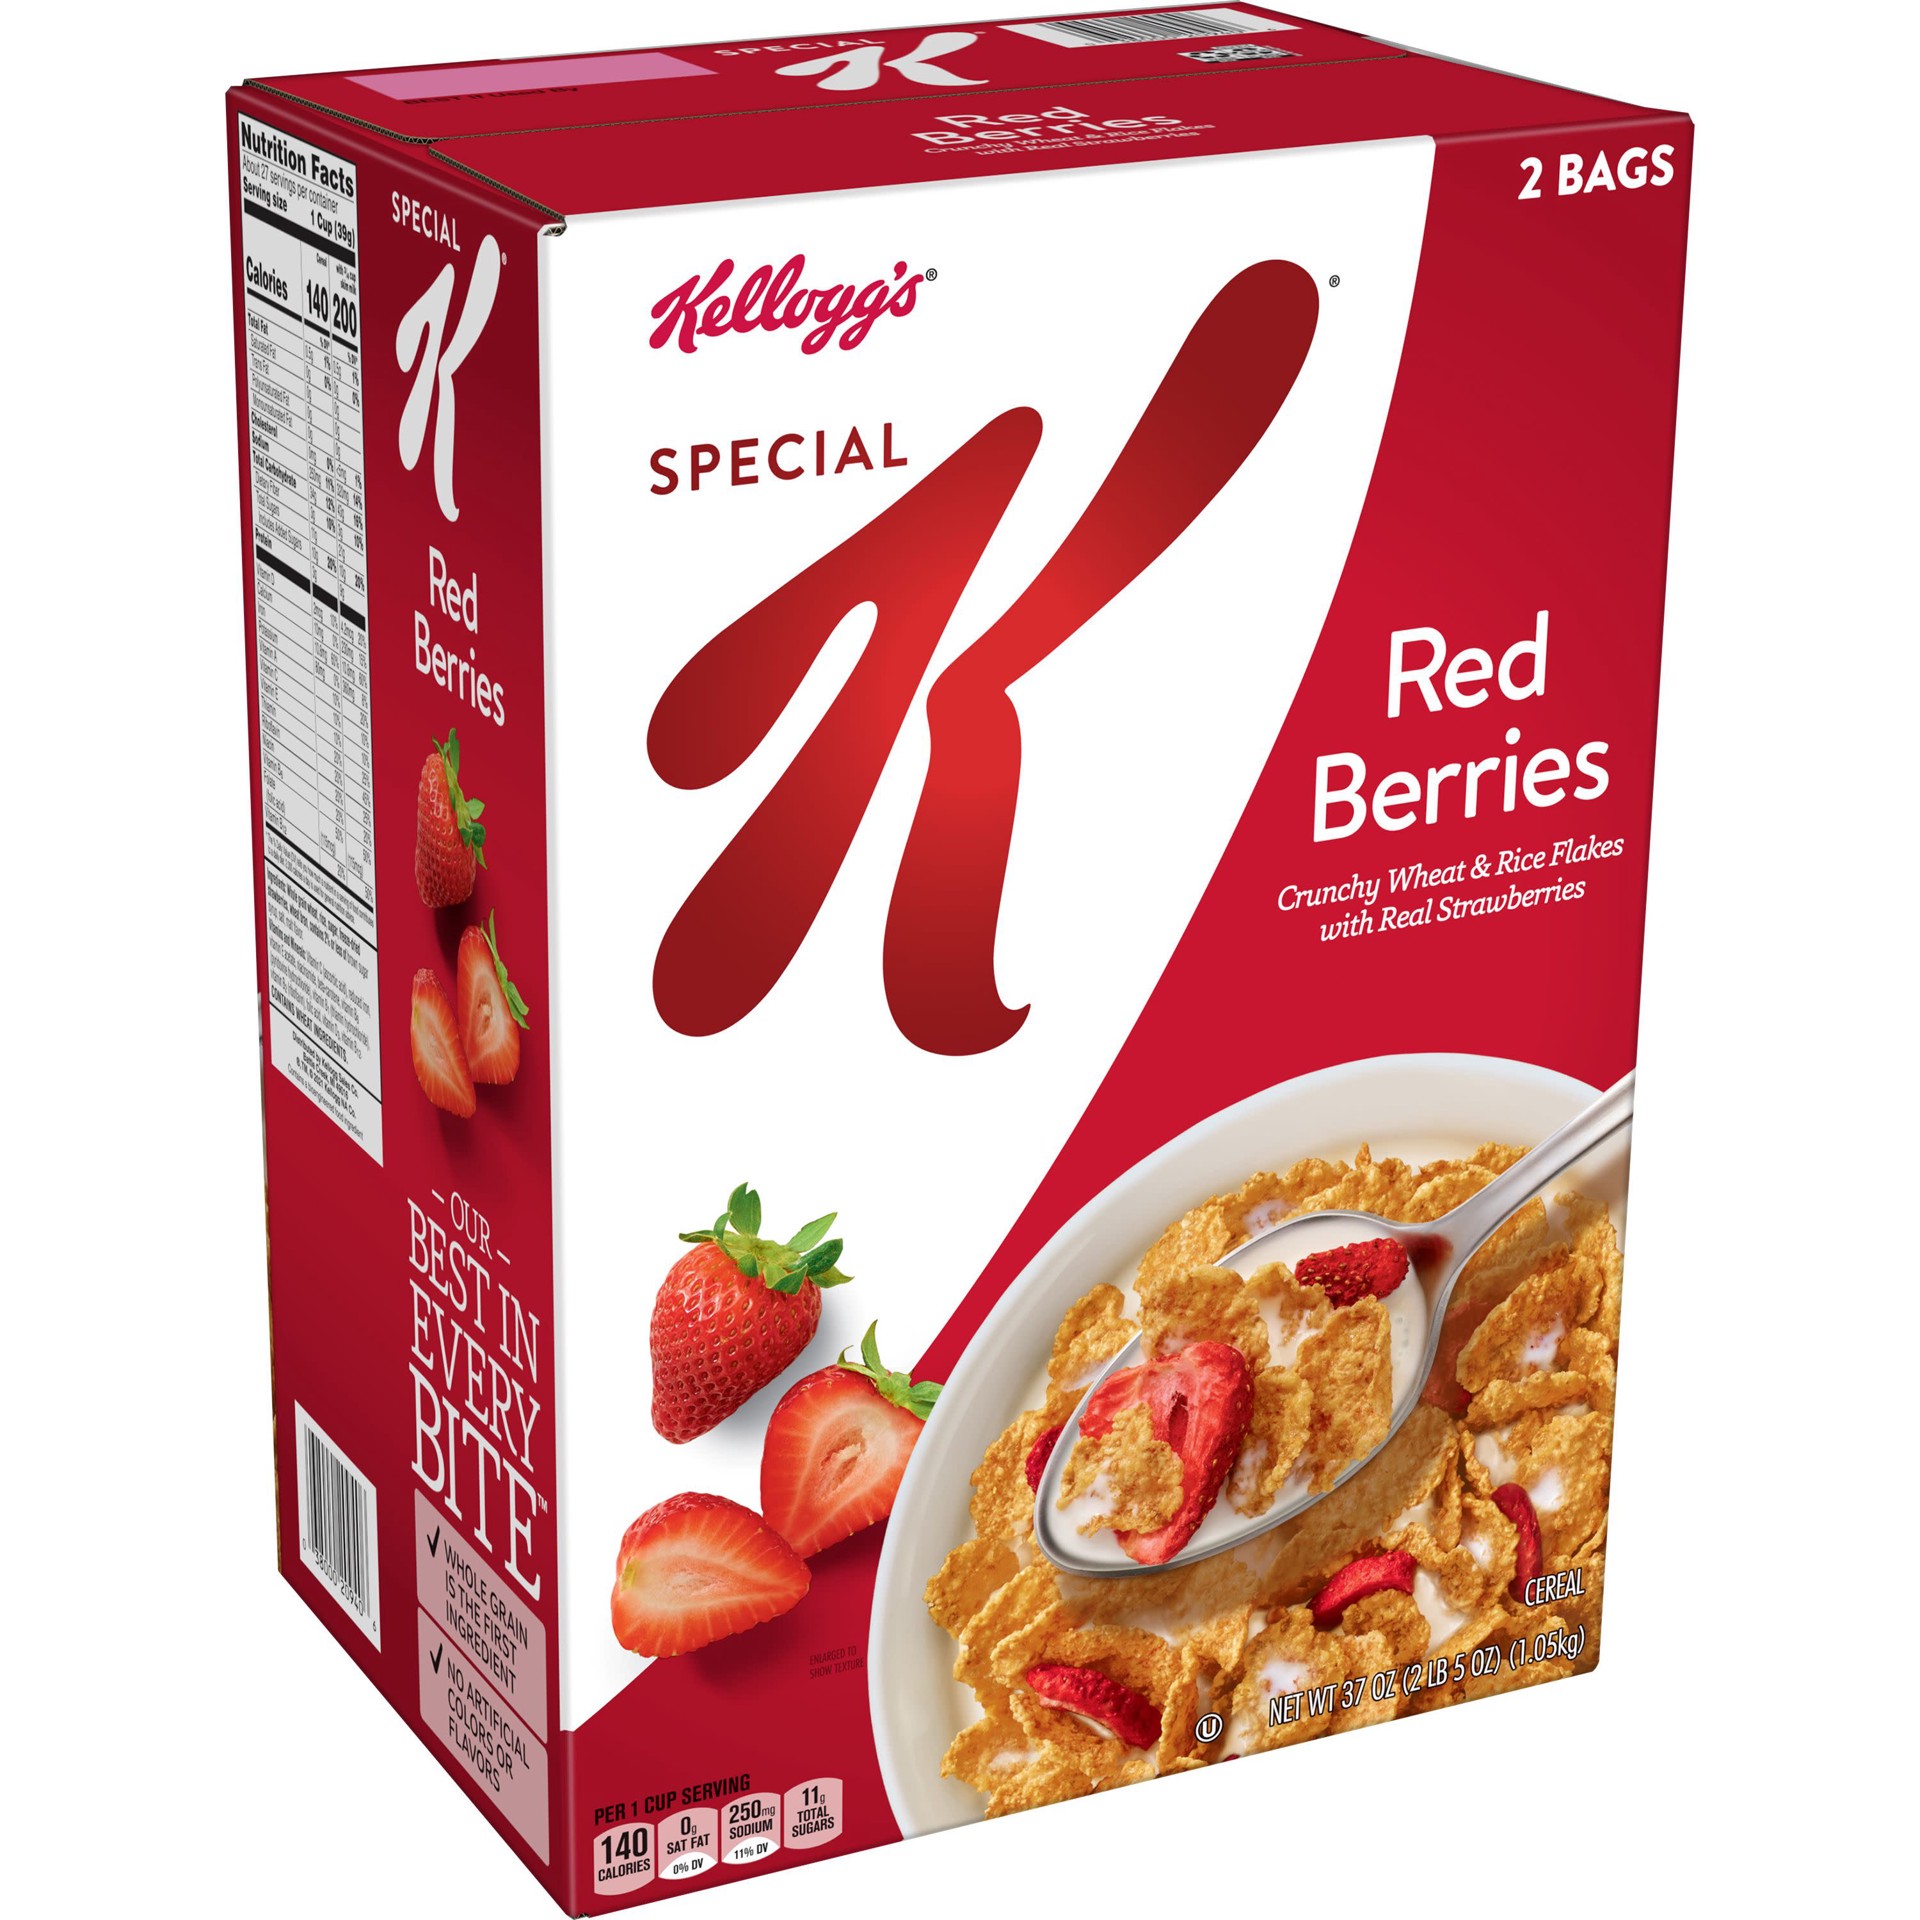 slide 1 of 5, Special K Kellogg's Special K Breakfast Cereal, 11 Vitamins and Minerals, Made with Real Strawberries, Red Berries, 37oz Box, 2 Bags, 37 oz